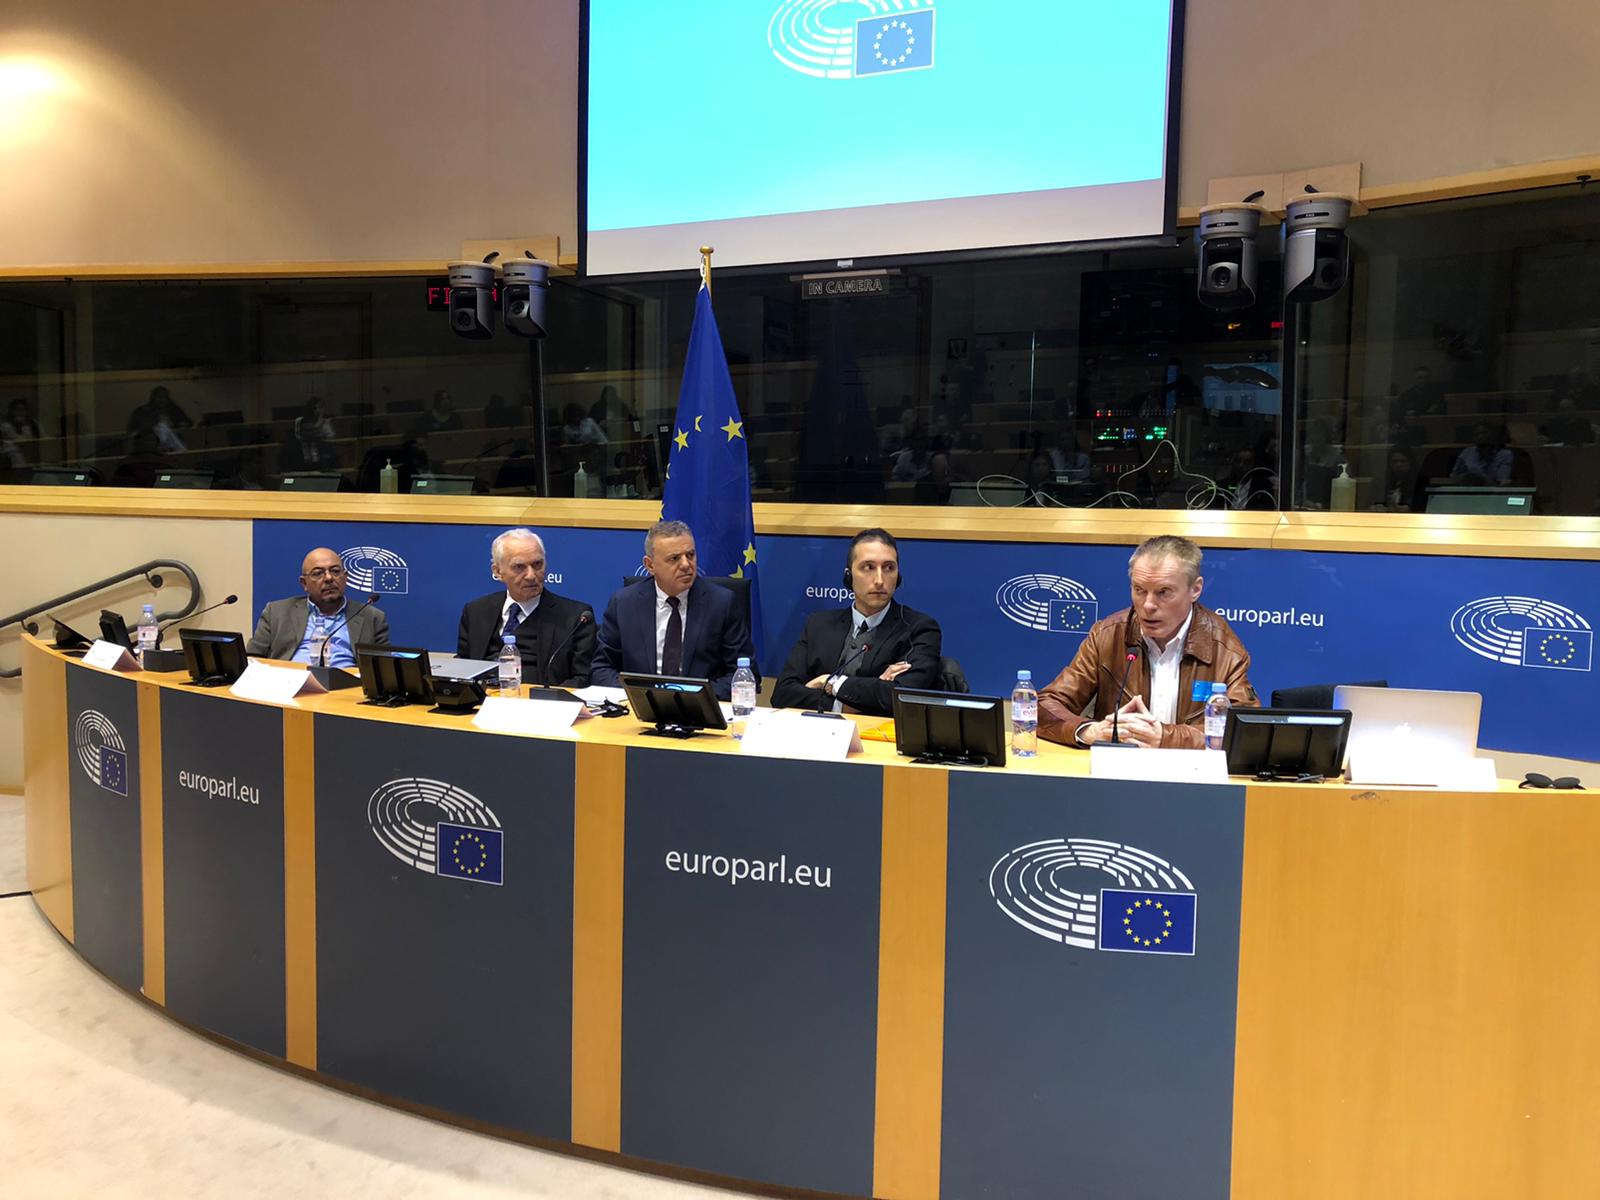 Brussels conference held at the European parliament